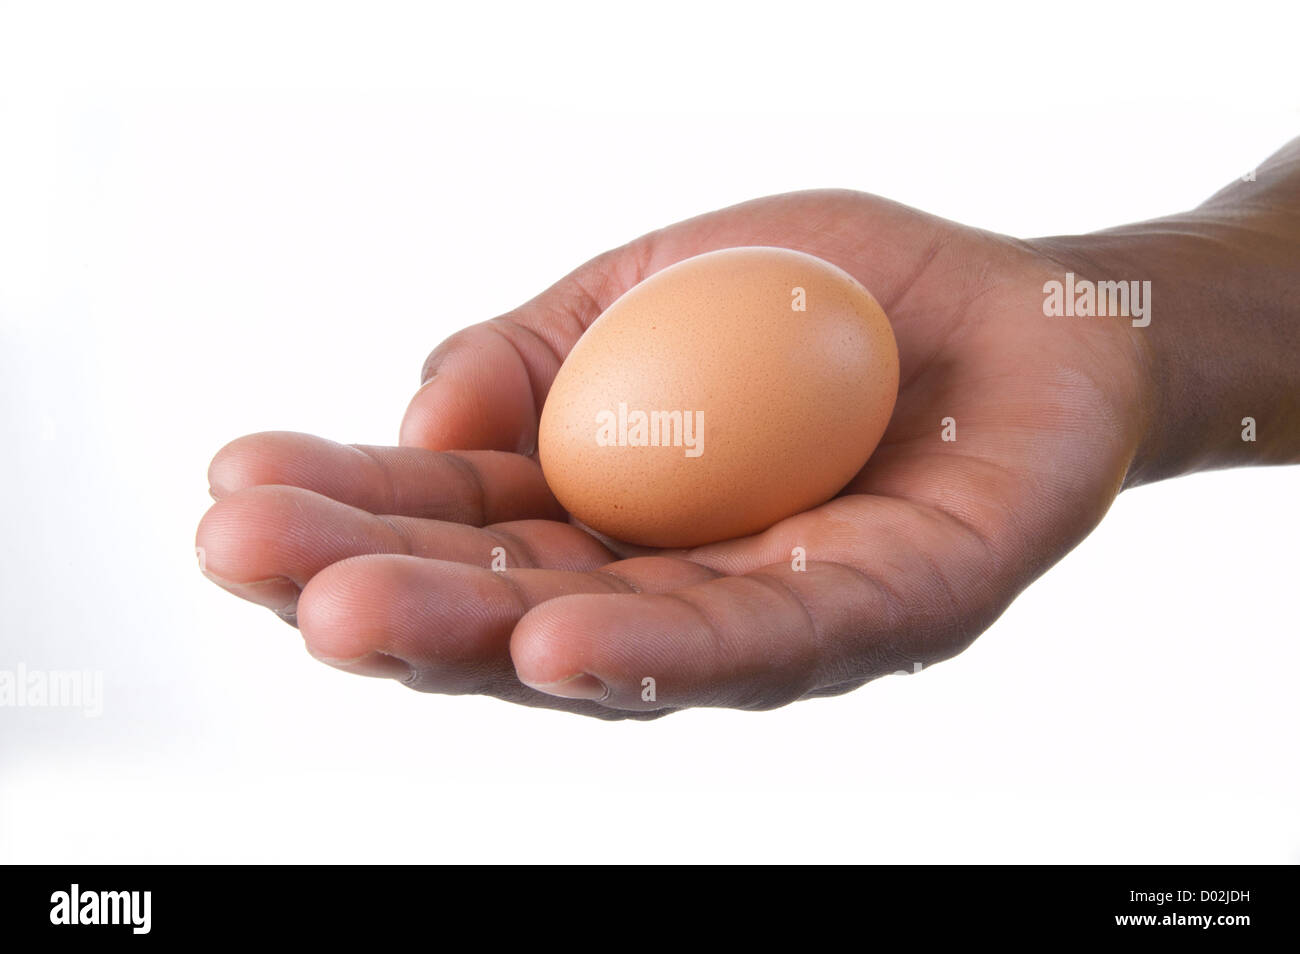 Hand holding a chicken's egg Stock Photo